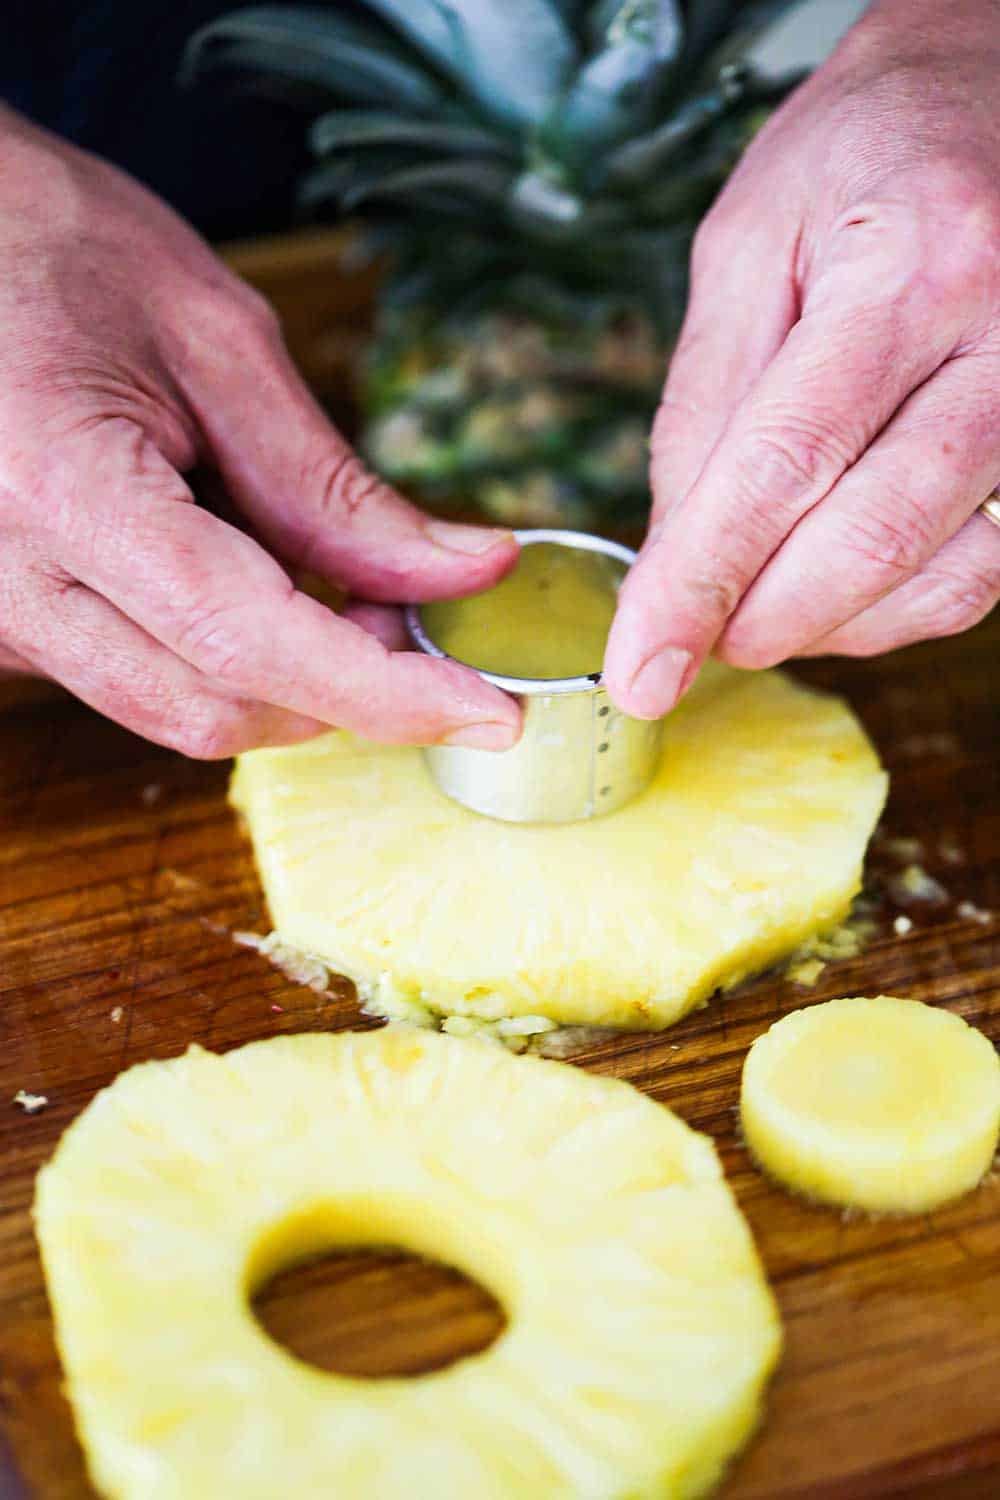 A pair of hands pressing a circular small cookie cutter into a pineapple slice on a wooden cutting board.